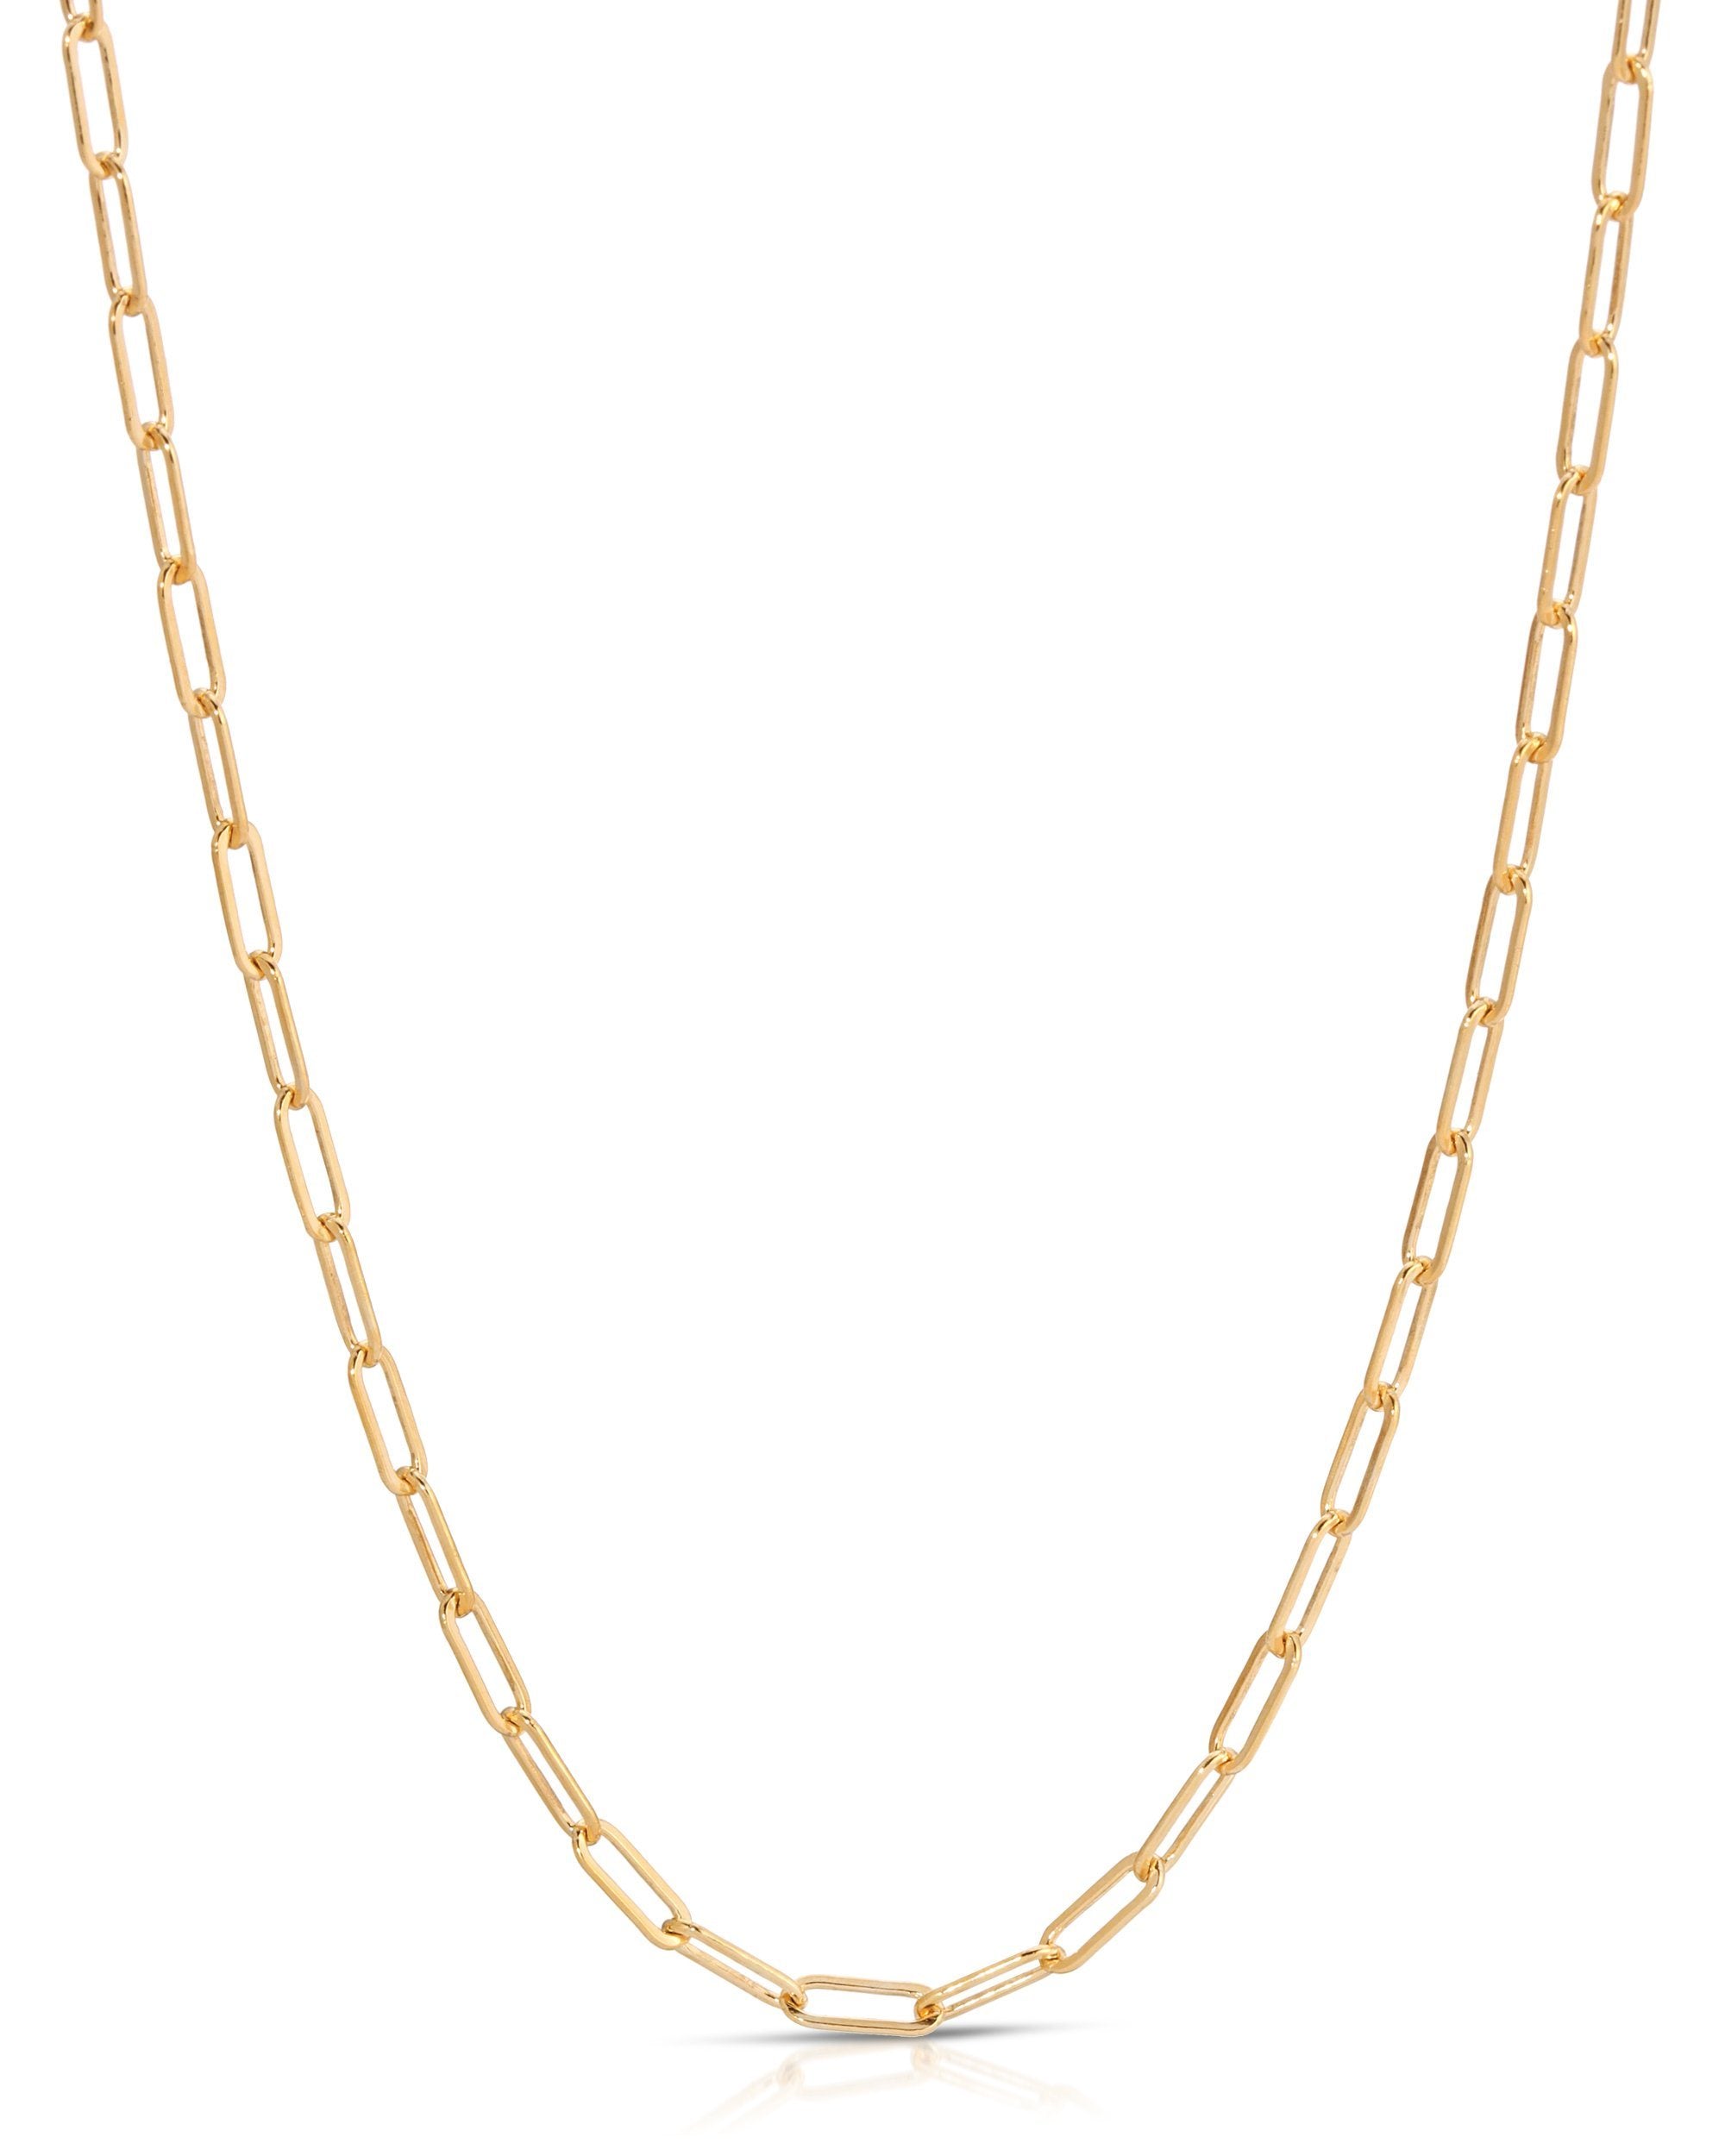 Nora Necklace by KOZAKH. A 14 to 16 inch adjustable length, thin flat link paperclip style chain necklace, crafted in 14K Gold Filled.